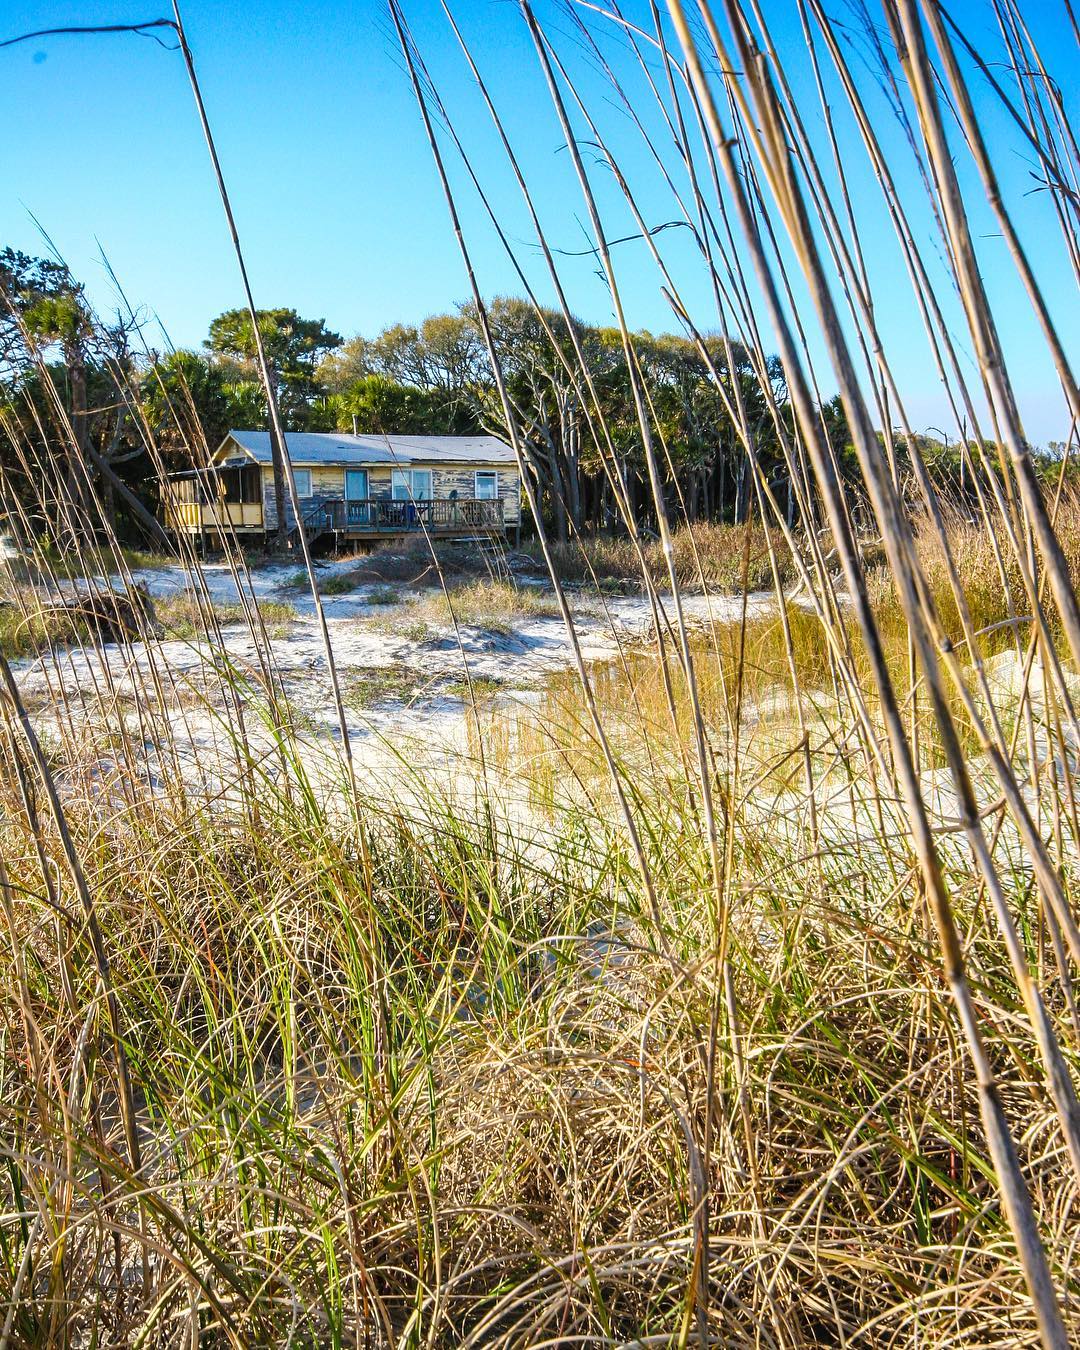 This is one of the last images I captured of our cabin on Hunting Island, taken in 2007. You can see a lot of beach here separating the cabin from the ocean. My grandfather built this cabin when my dad was a little boy. There is old 8mm movie film showing my dad as a boy crossing the road, where this picture was taken, climbing large dunes as high as the house, then off to the beach. When I was a boy, the road was still there yet unused, and a path through the dunes to the beach. I remember growing up laying under the ceiling fan in the summer with no air conditioning with the windows wide open. There was no breeze because the dunes blocked the breeze from the house. You can see here there are no dunes, so we enjoyed the breeze from the ocean during the last few years before we tore it down. The last night I stayed here in 2008, the ocean was under the deck piers and you could feel the cabin shift. It was a rustic cabin, but it was an awesome getaway for the family! I still wish it was here for Rosebud, George, and Henry to enjoy experiencing the lowcountry culture including the deer that would walk right up to you. #DreamingOfBeaufort #HuntingIsland #Canon #20D